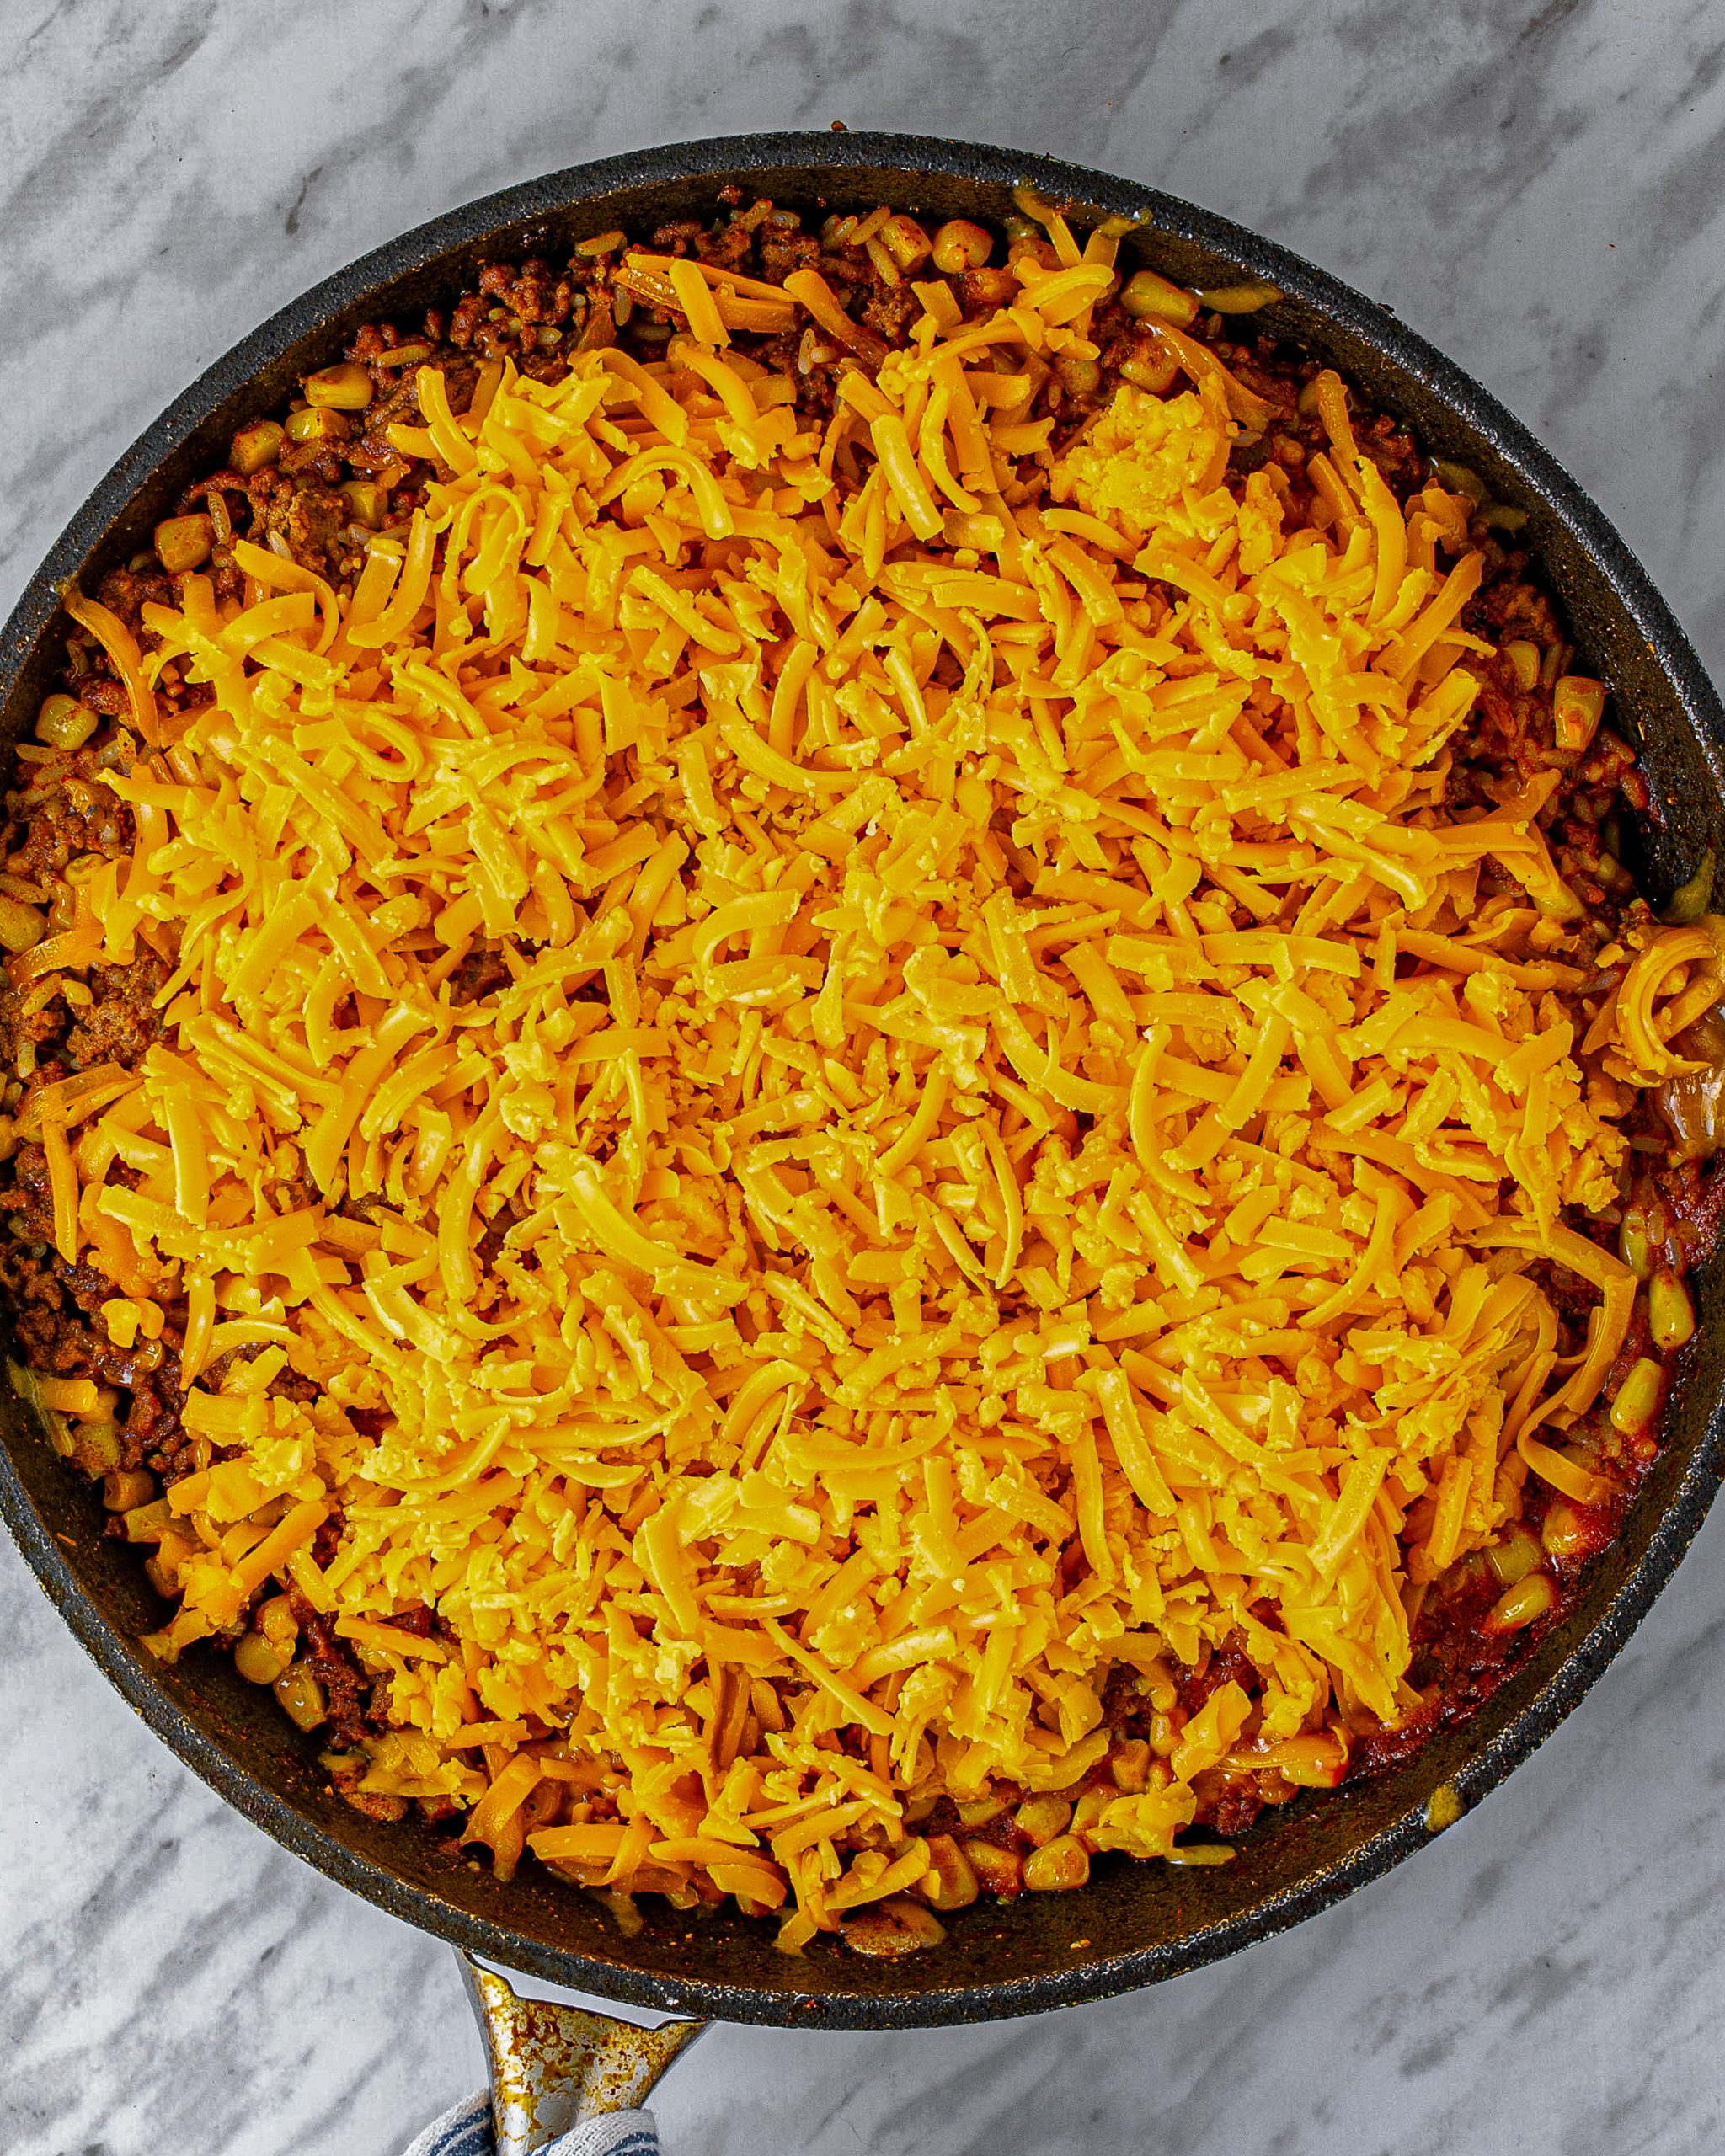 Sprinkle the cheese on top and cover again.